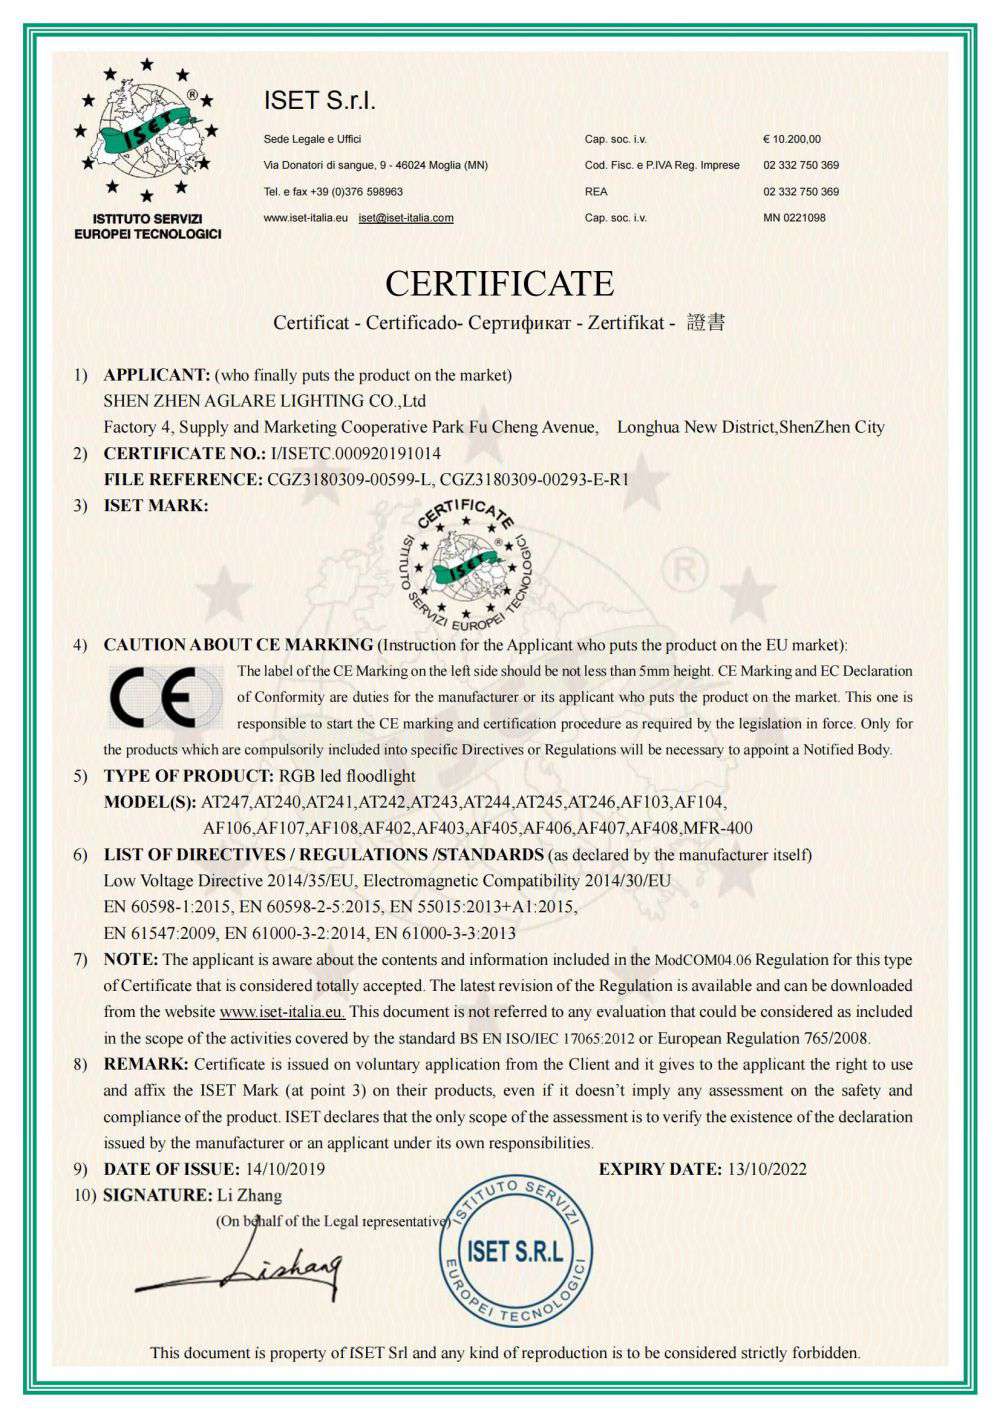 Aglare Lighing's products are certified CE by European IISETC